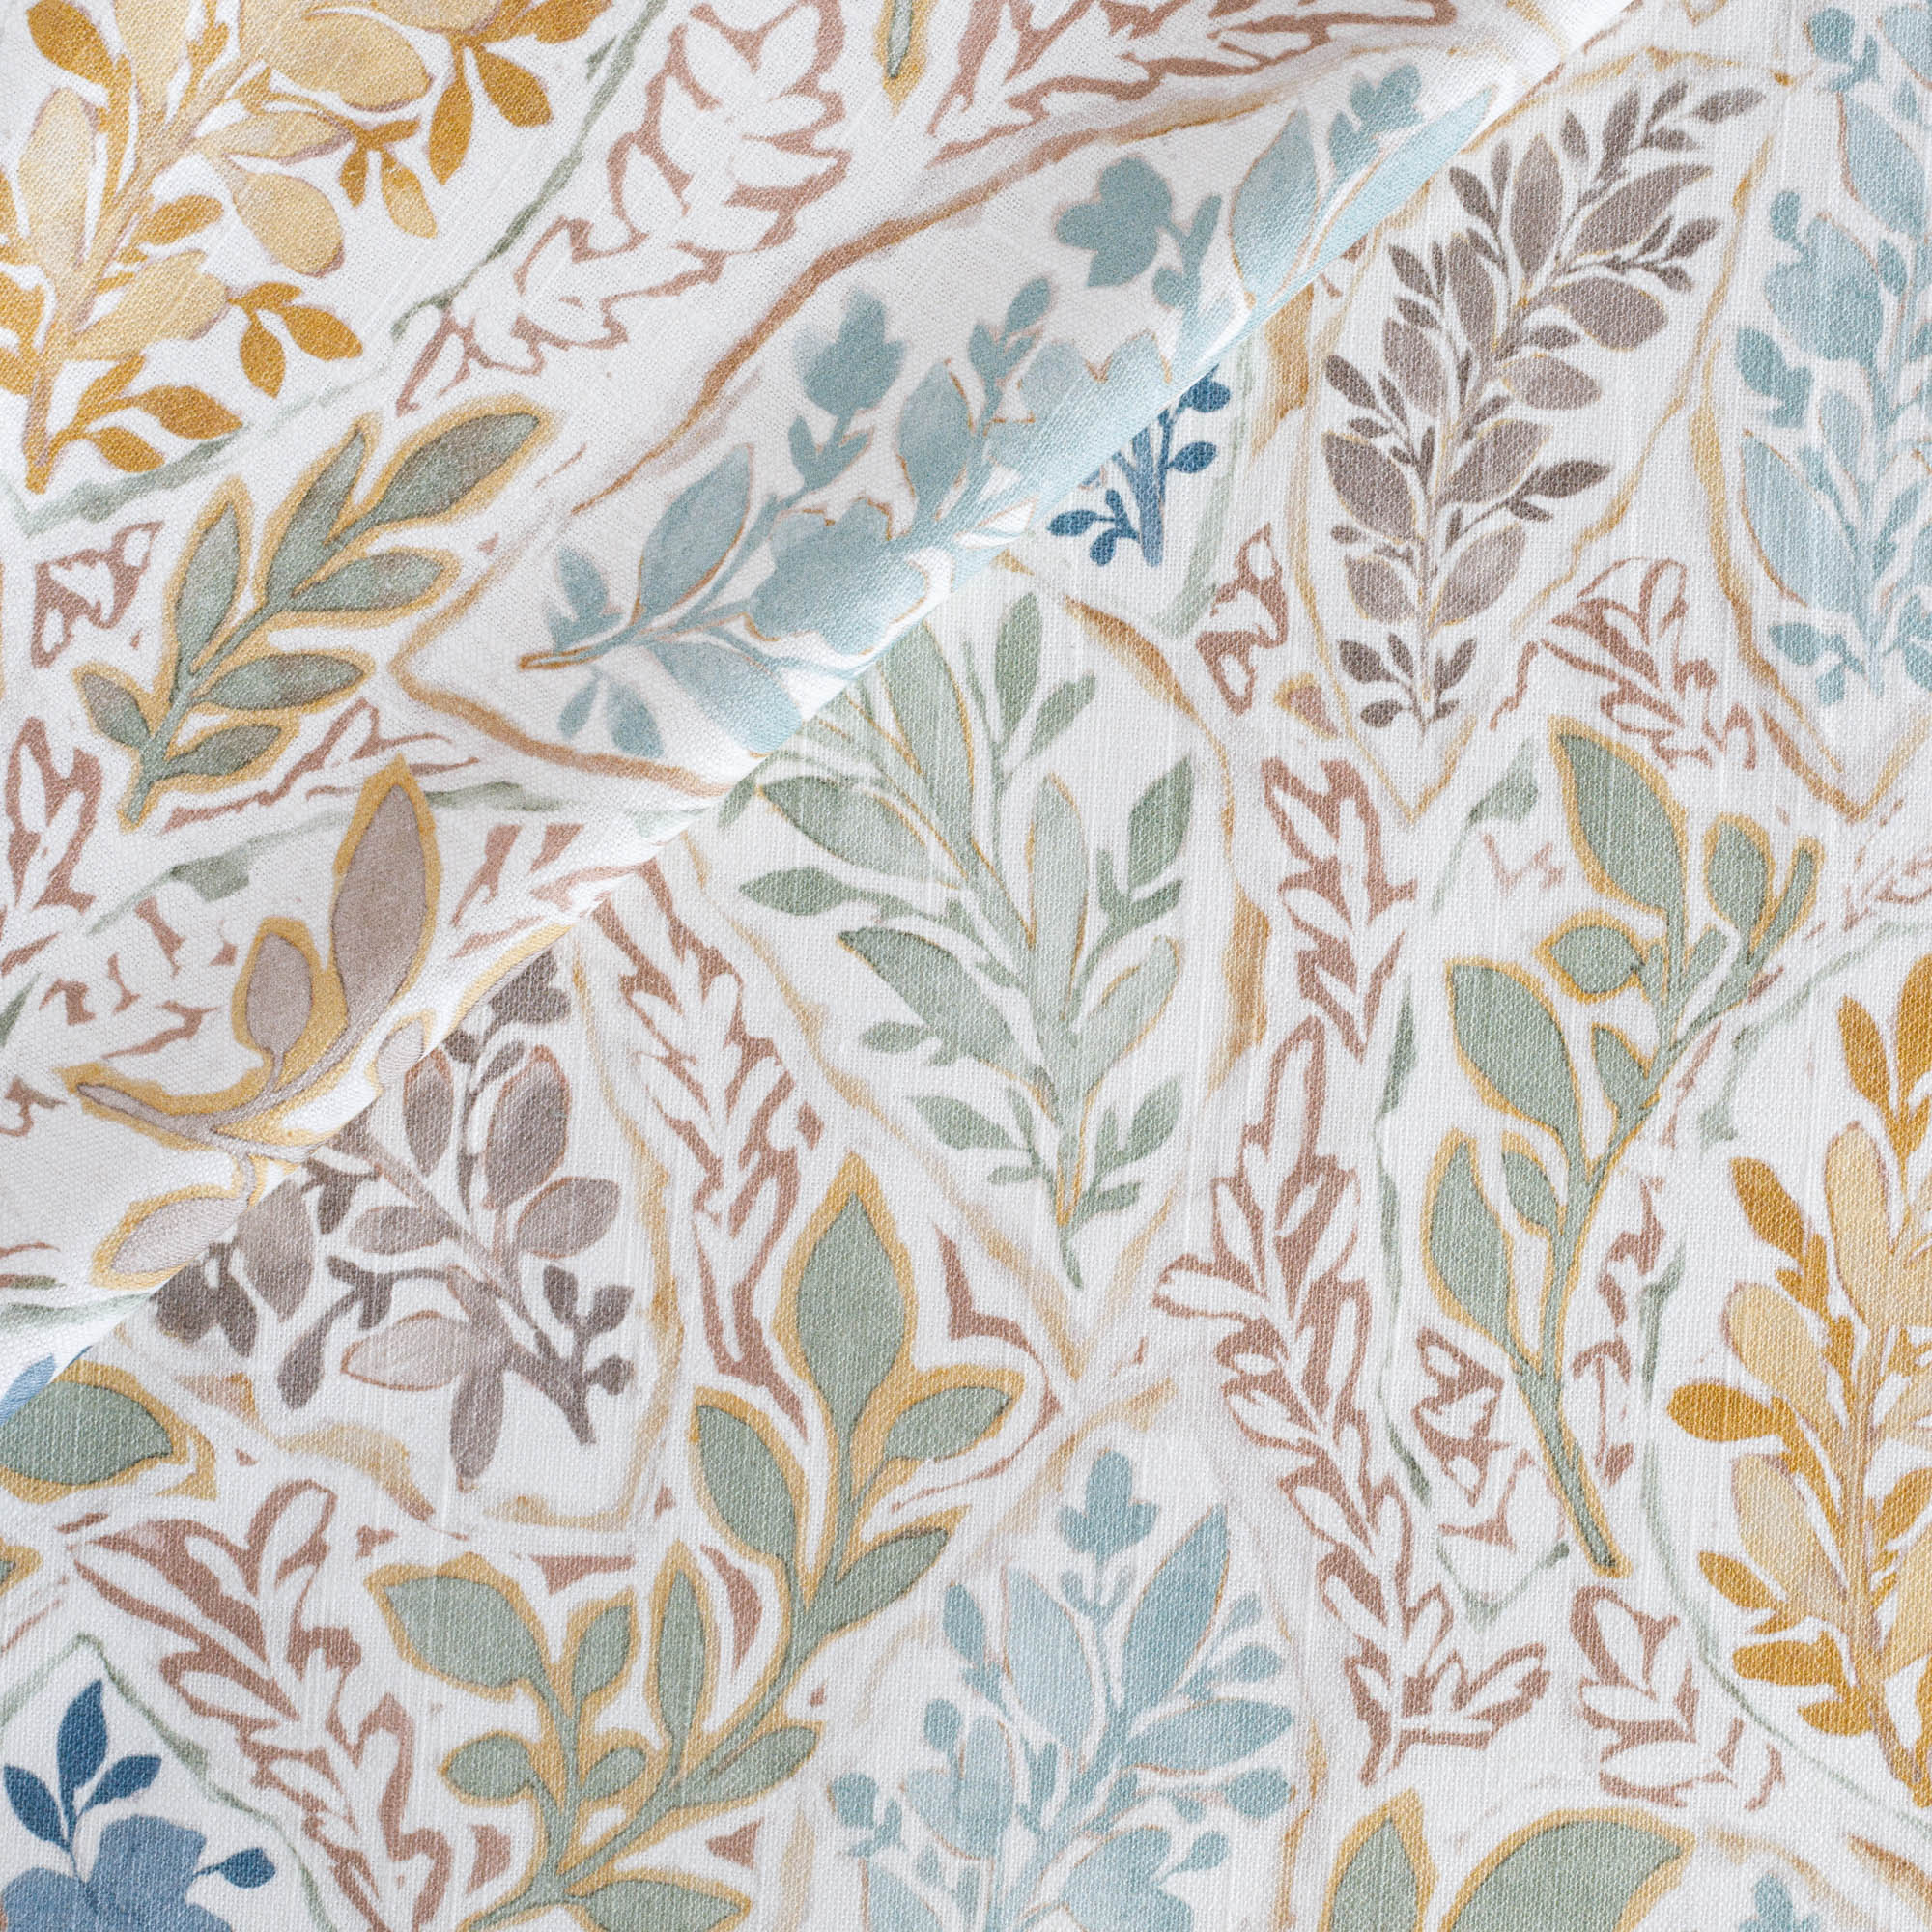 Rumi Fabric Harvest, an aqua, sage, marigold, mauve and stone blue watery floral print drapery fabric from Tonic Living